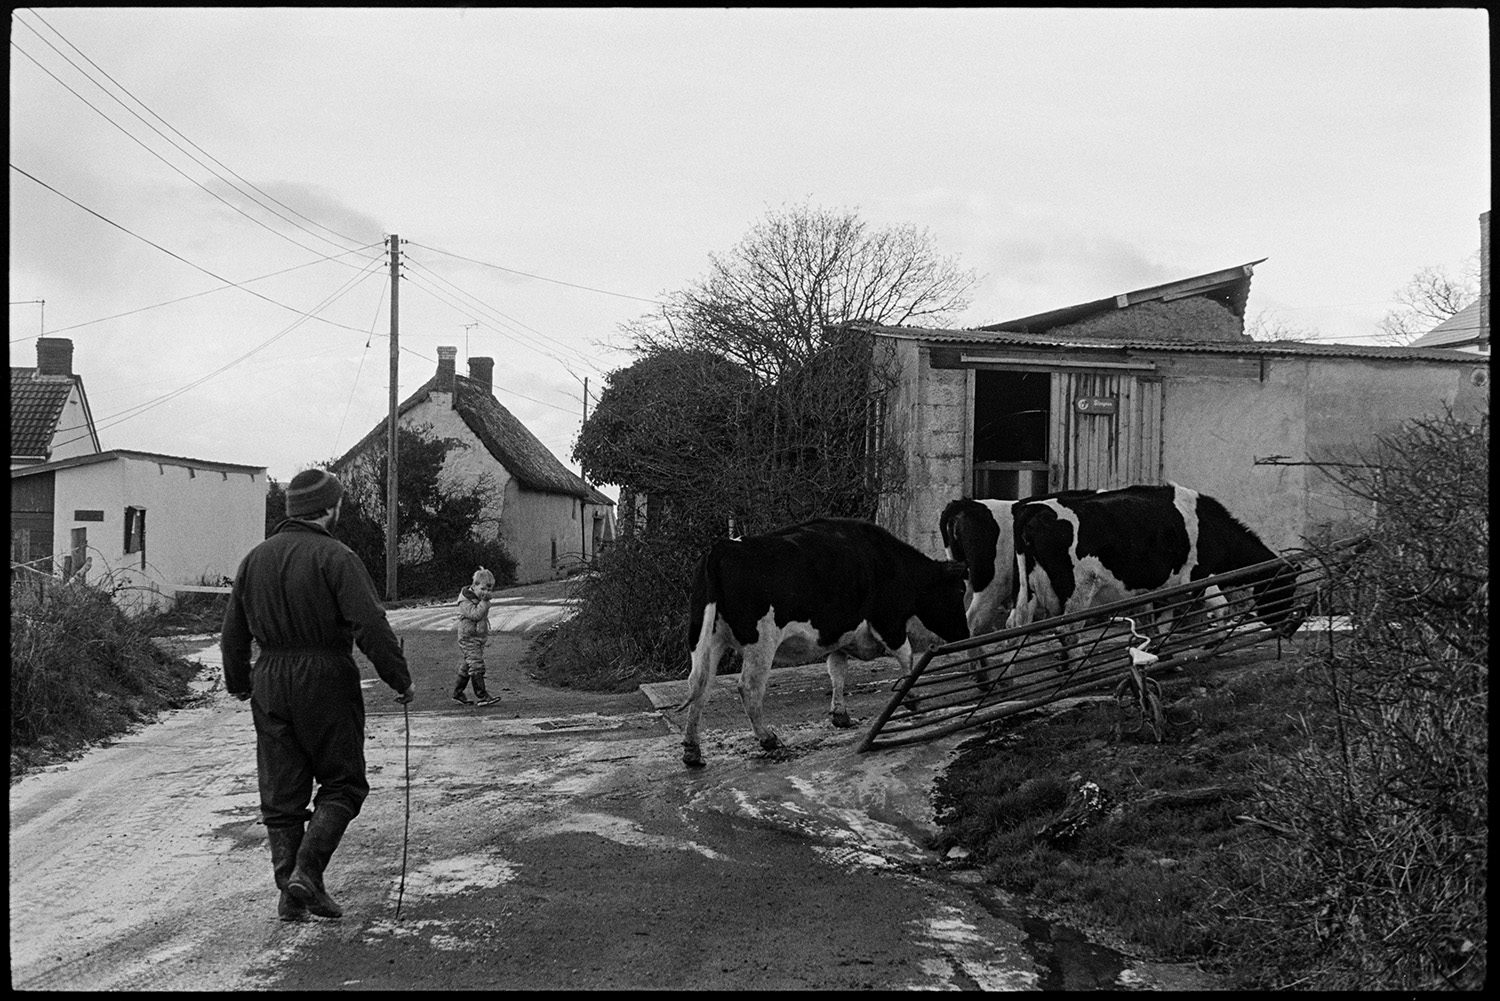 Milking herd of cows going through village. 
[Fred Folland herding three dairy cows into a farmyard at Upcott, Dolton, to go to be milked. A child is with him. Barns and a thatched cottage can be seen in the background and the road outside the farm has a light dusting of snow.]